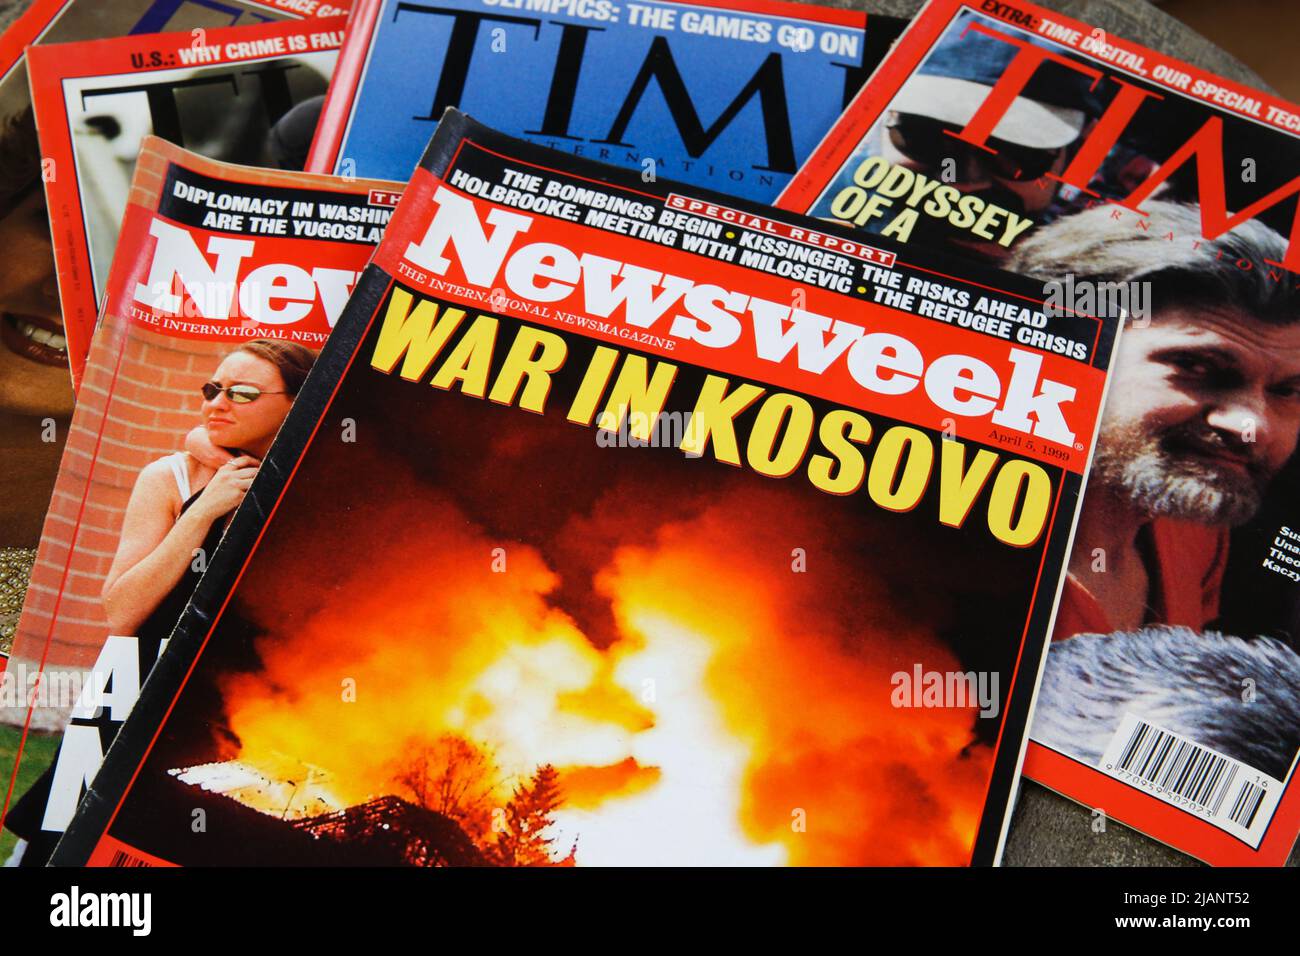 NEWSWEEK Magazine June 6 2004 Your Electronic Future High-Tech Special report... 